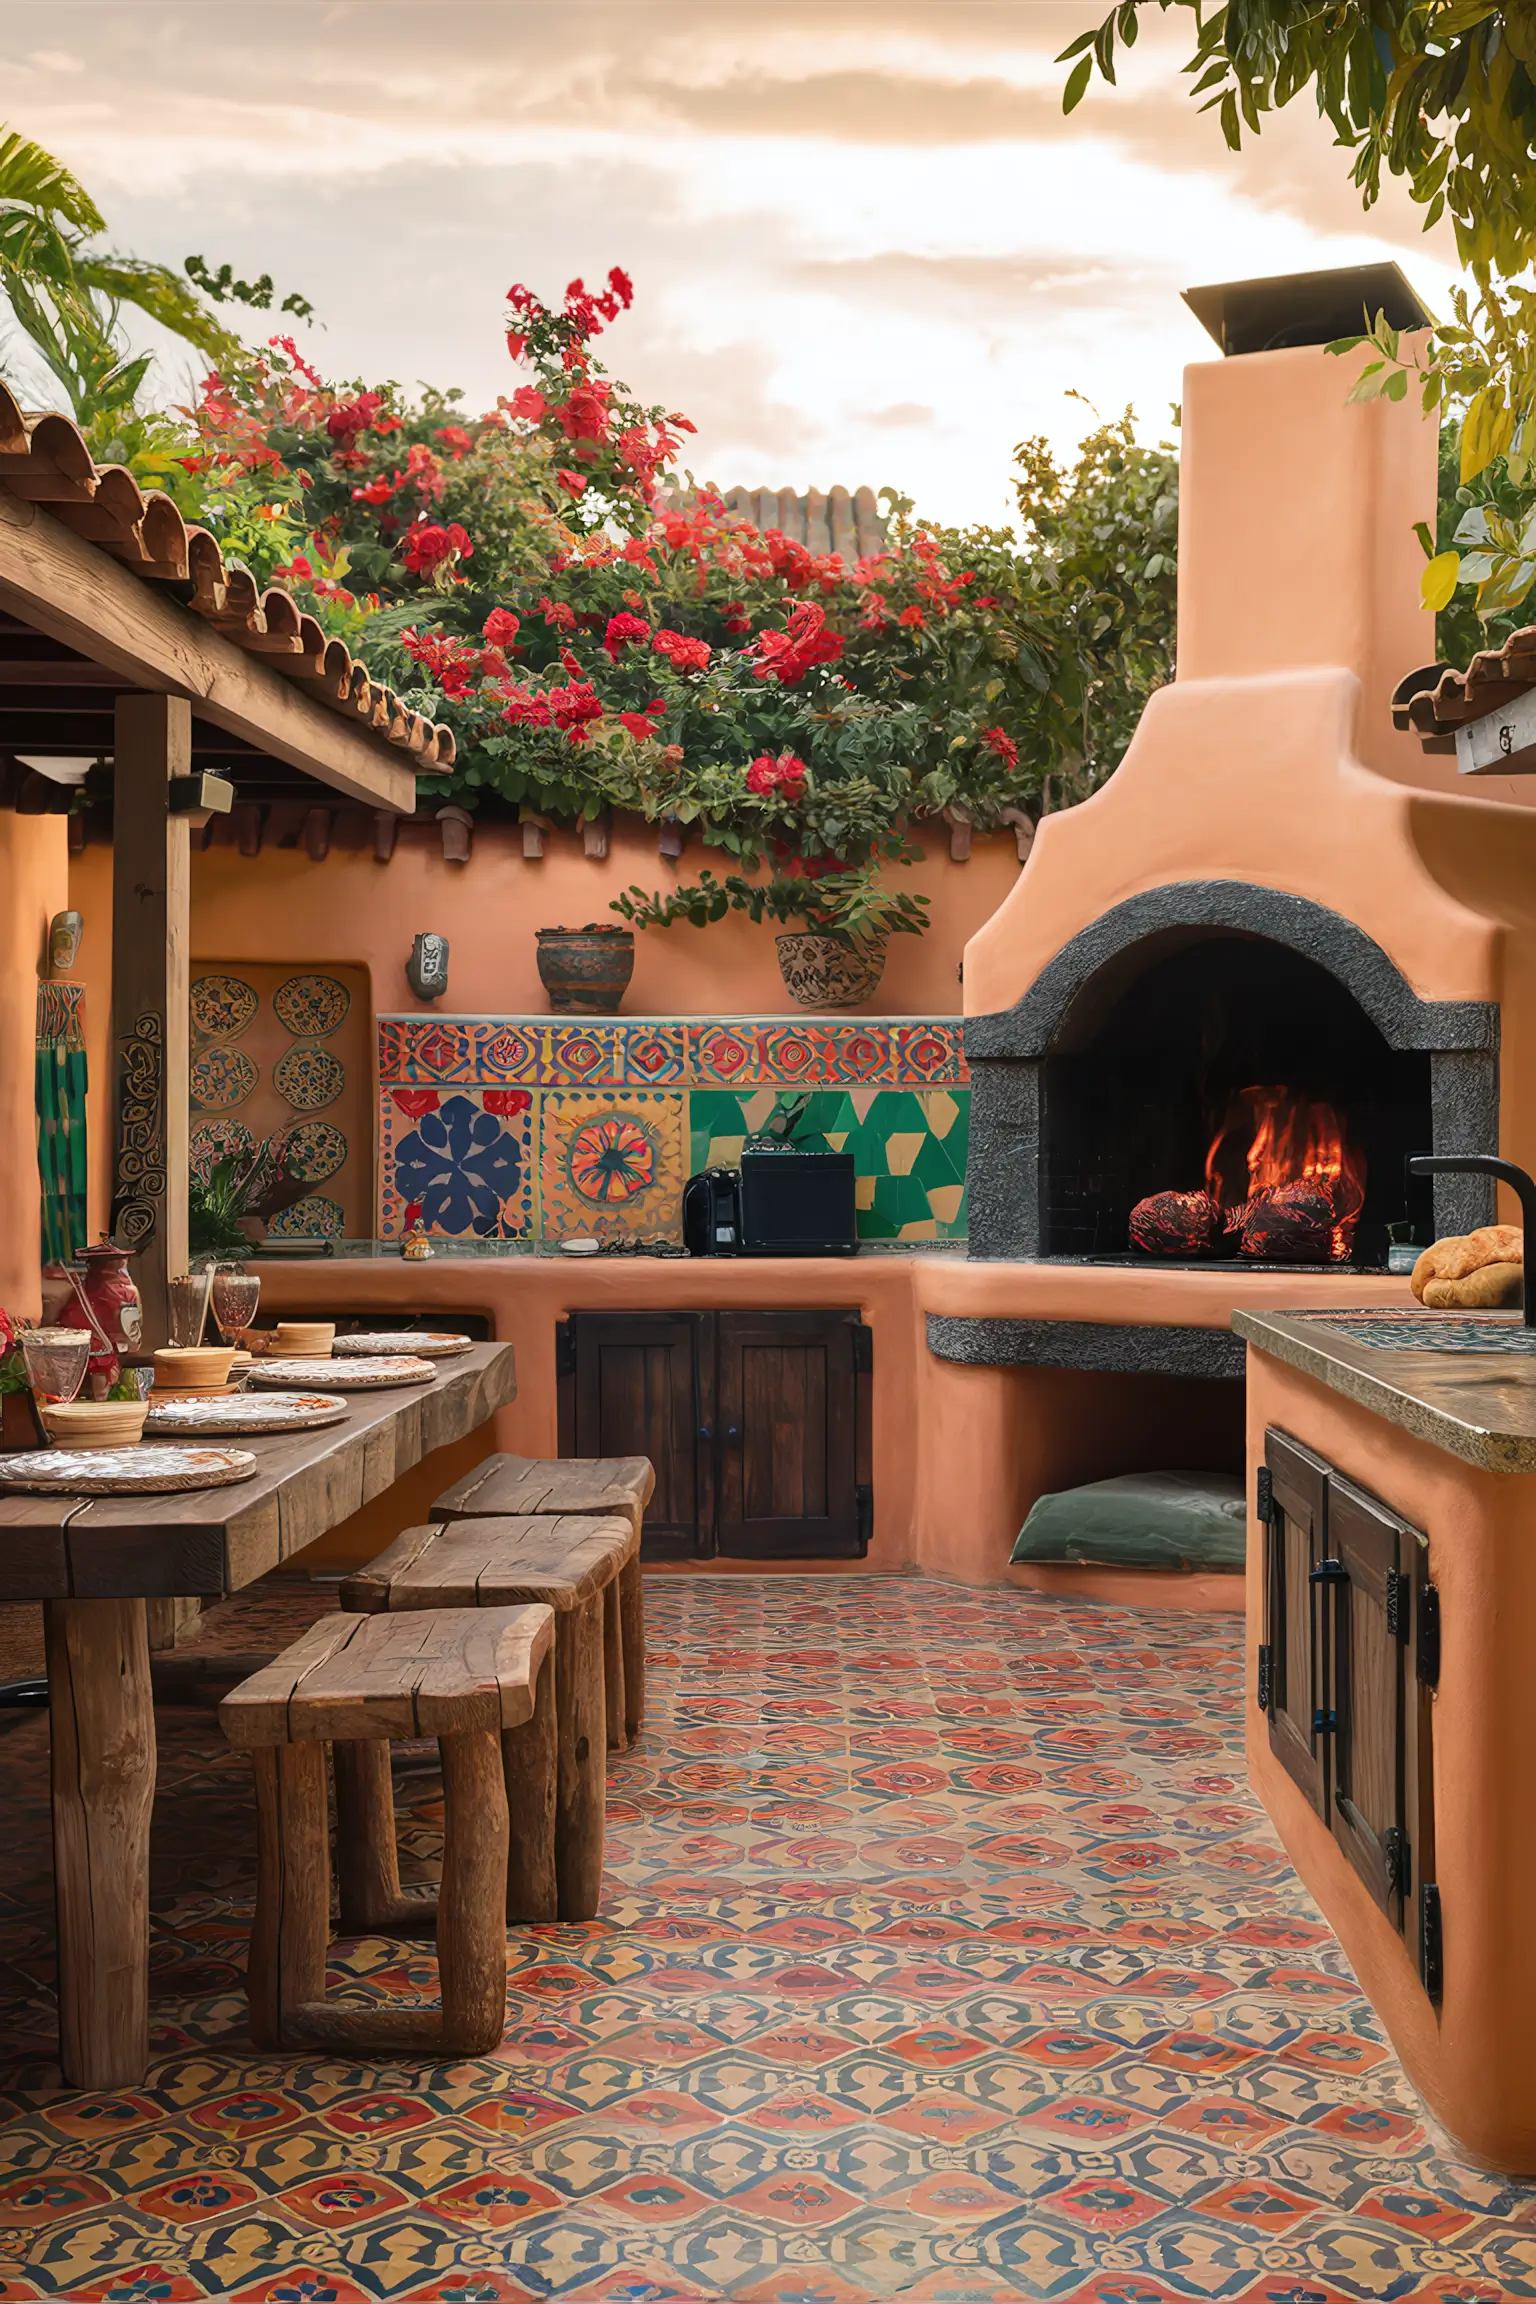 Mexican-inspired backyard kitchen with colorful tiles and rustic furniture.